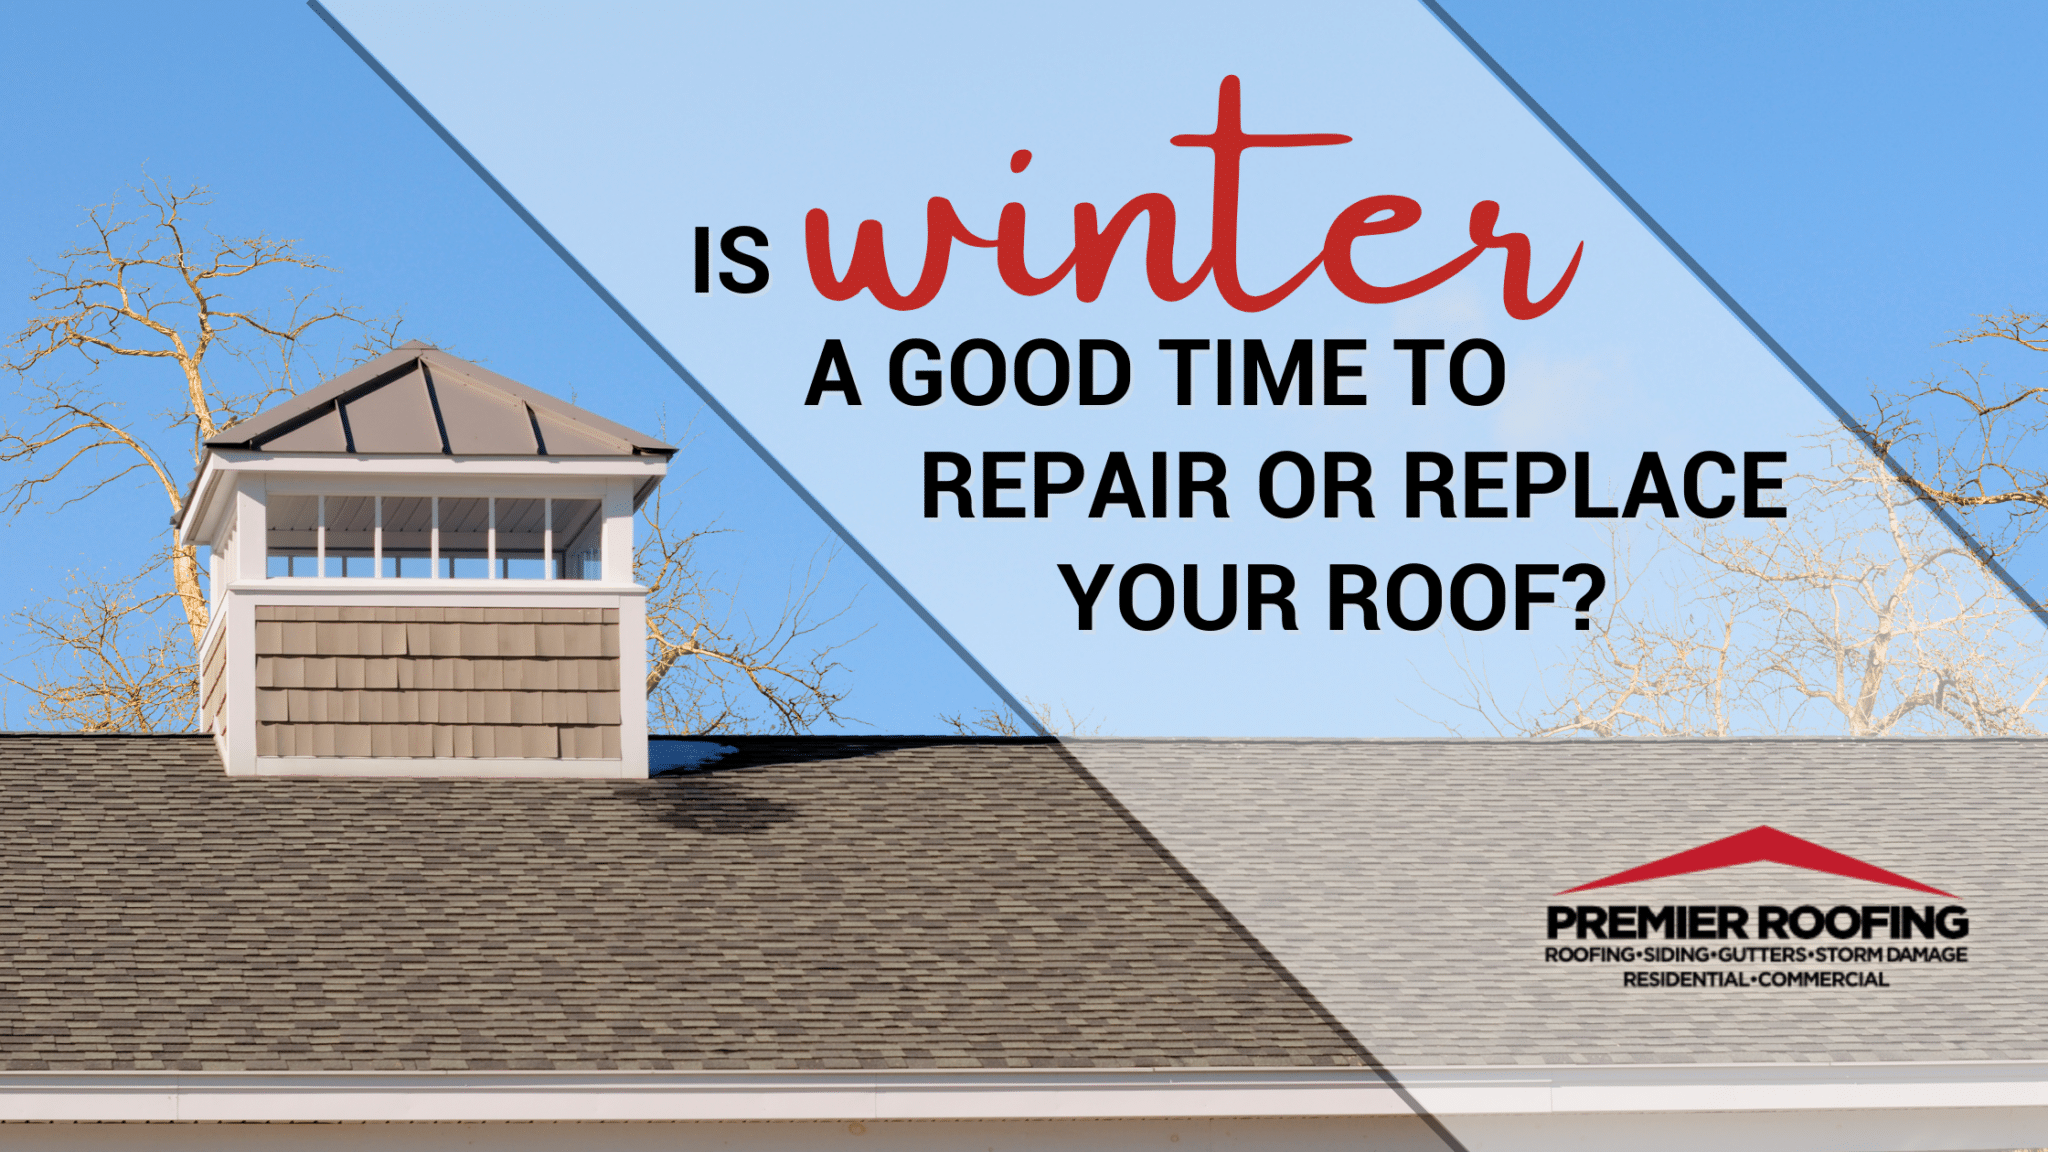 Is winter a good time to repair or replace your roof?